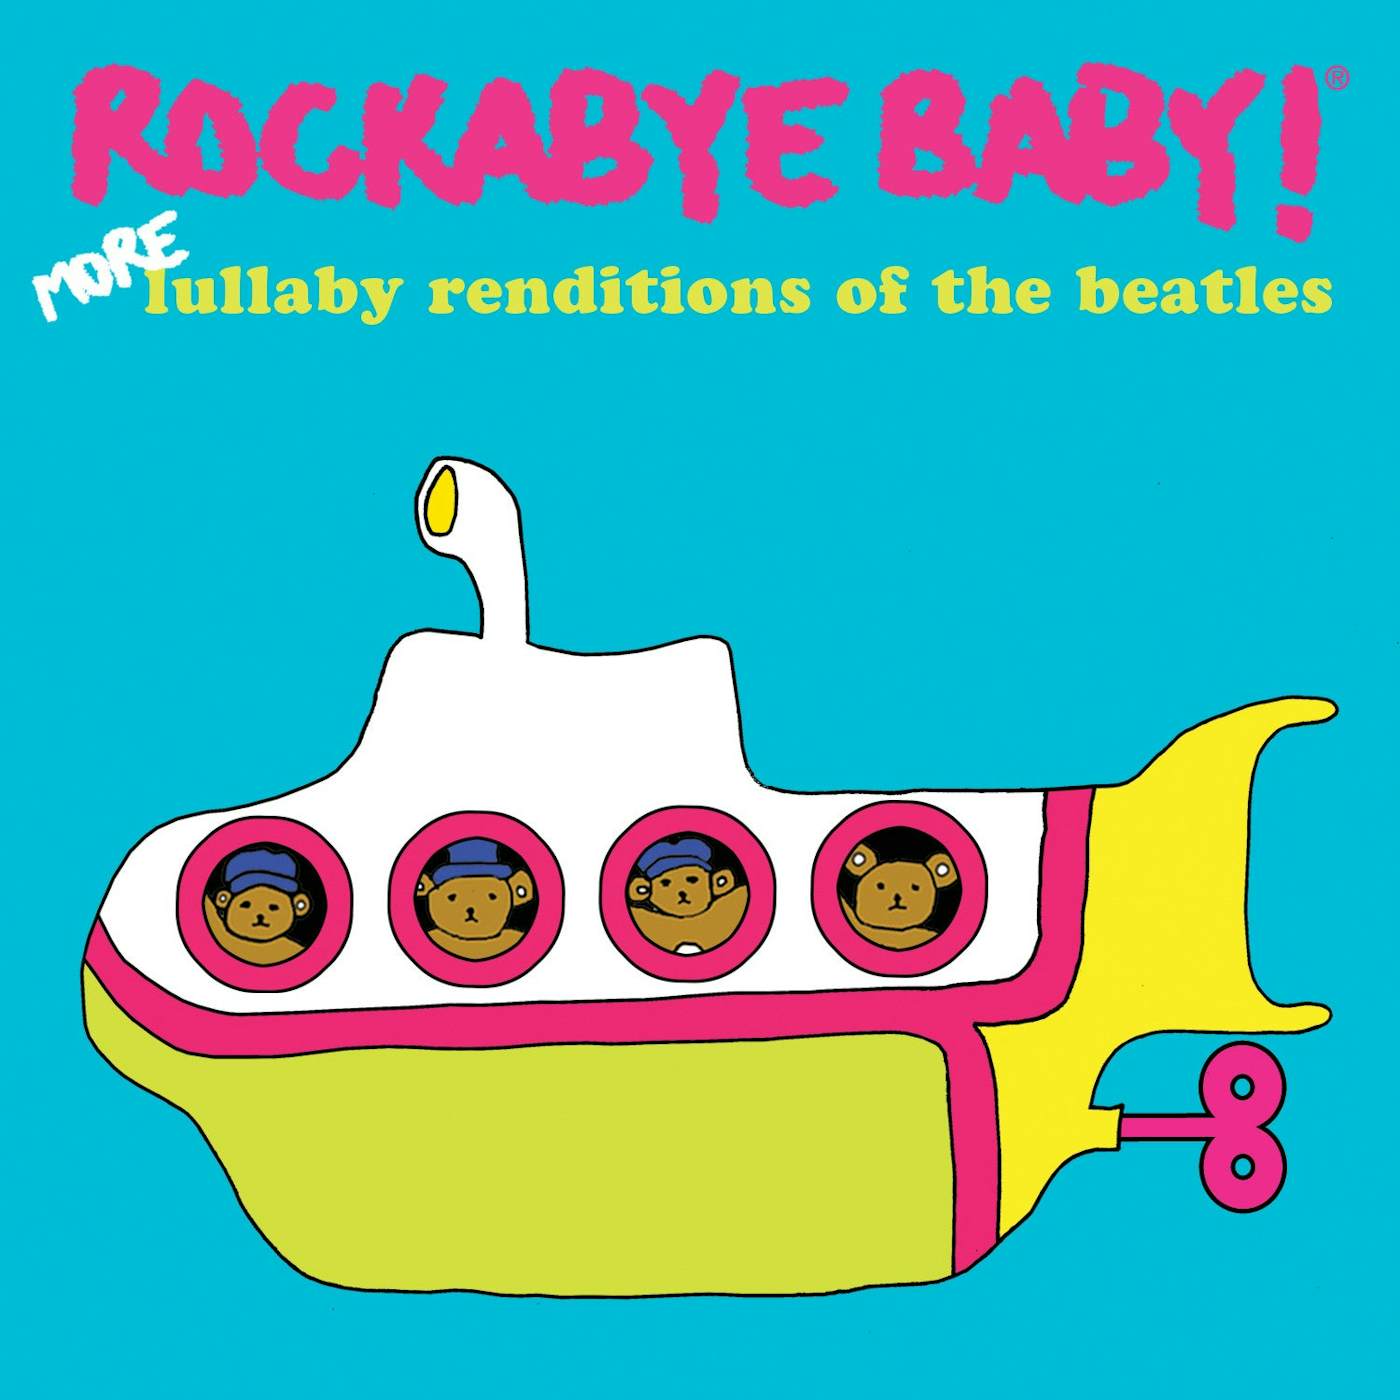 Rockabye Baby! More Lullaby Renditions of The Beatles